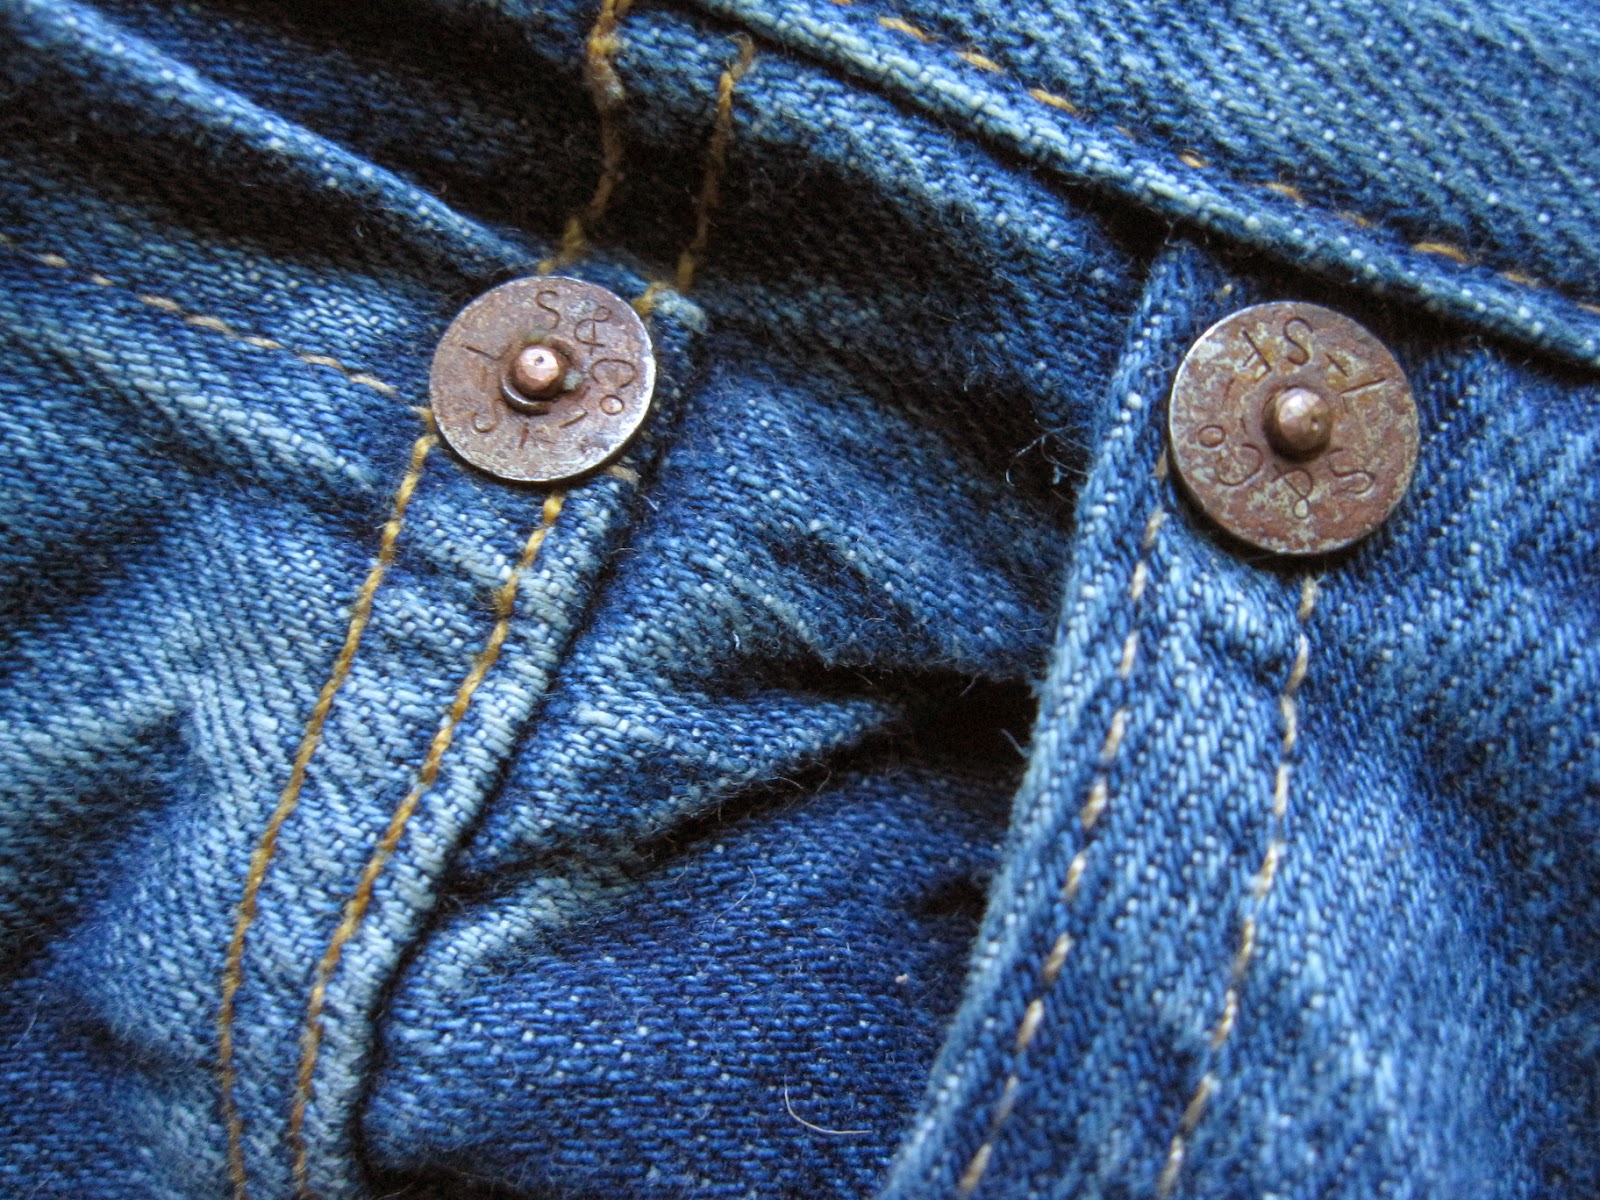 Why Do Jeans Pockets Have Tiny Buttons On Them?